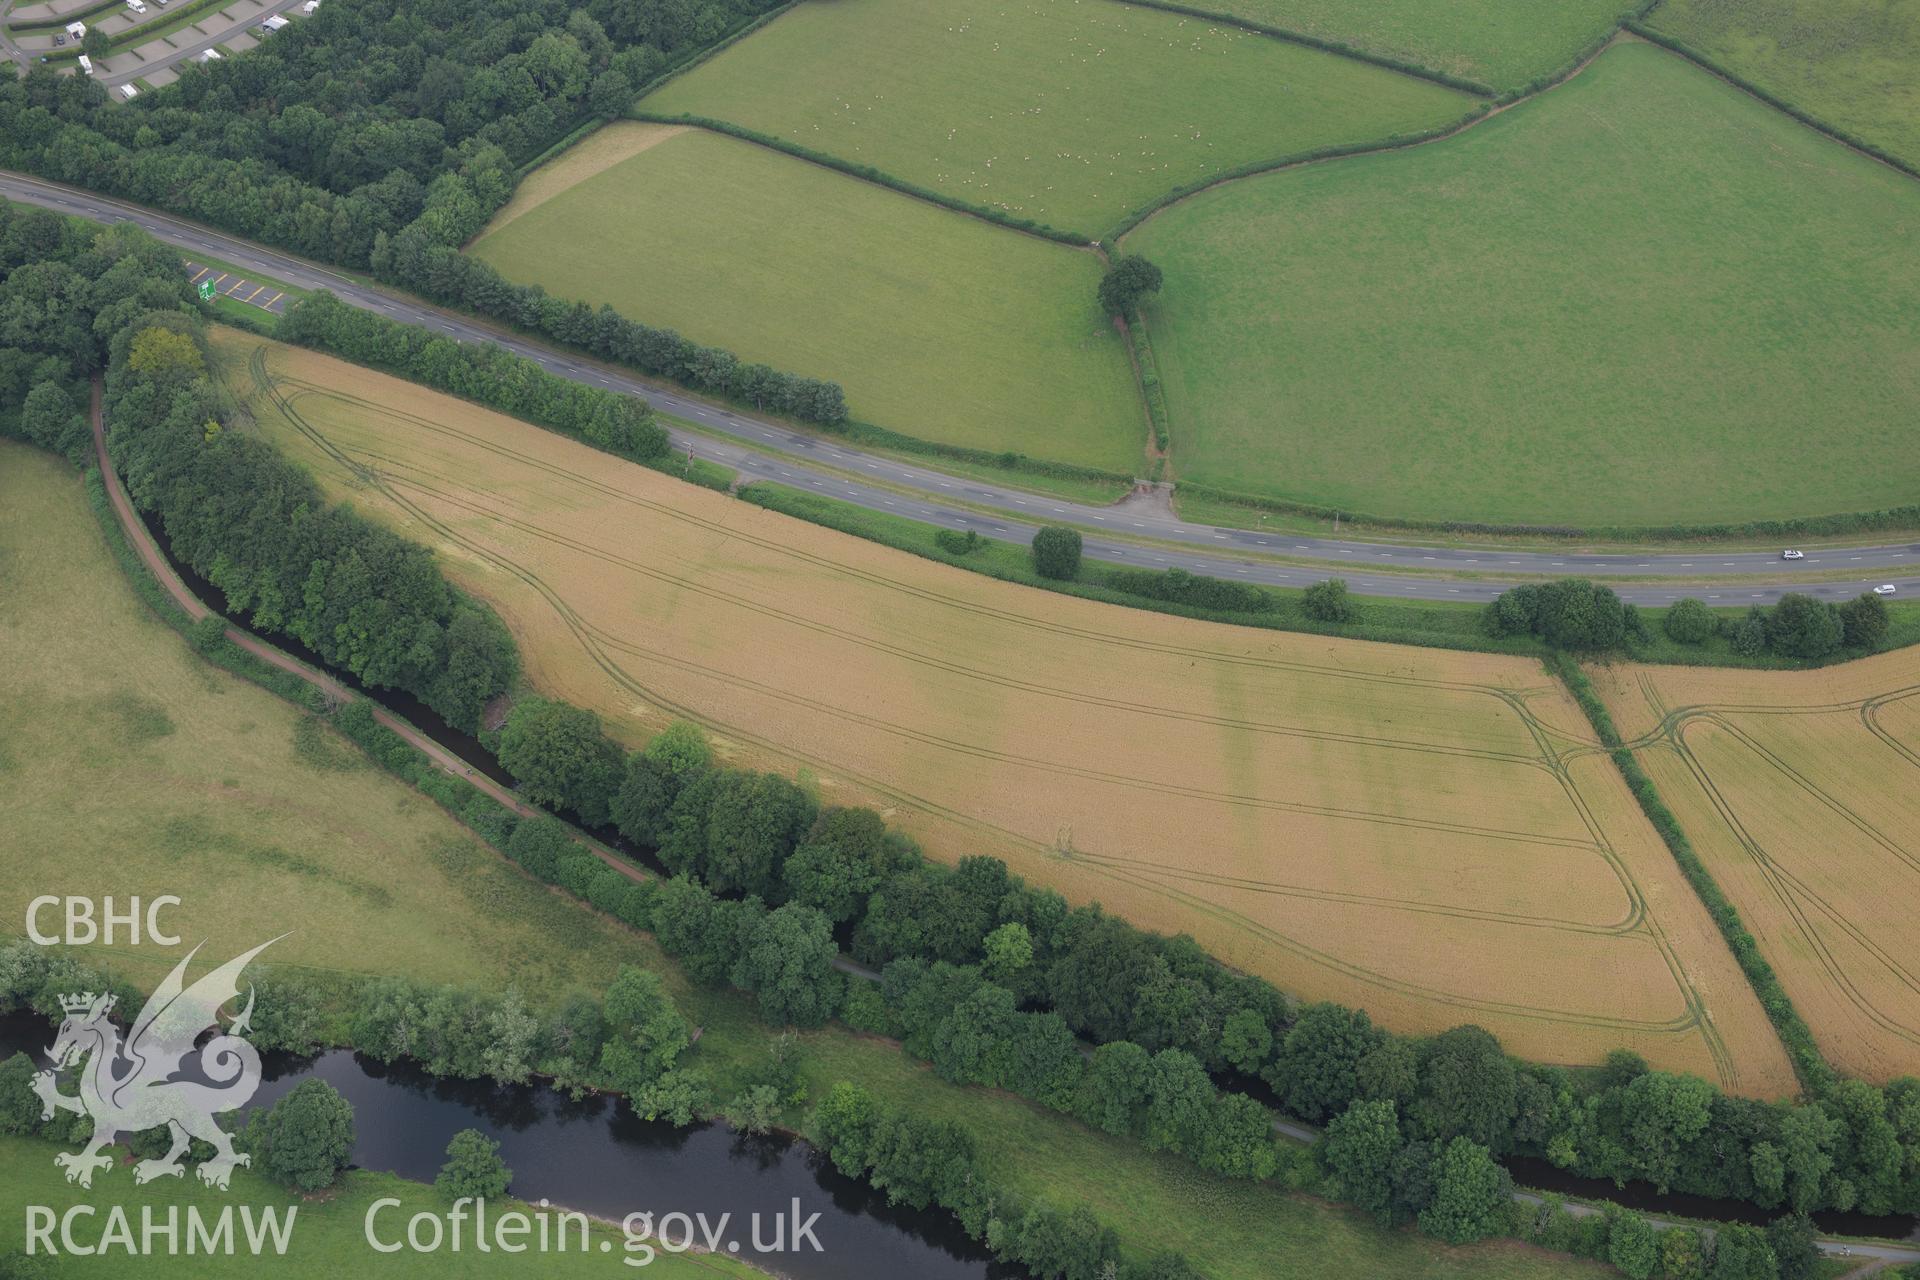 Cefn-brynich Roman fort, cropmarks of marching camp to west of fort, taken by RCAHMW 1st August 2013.